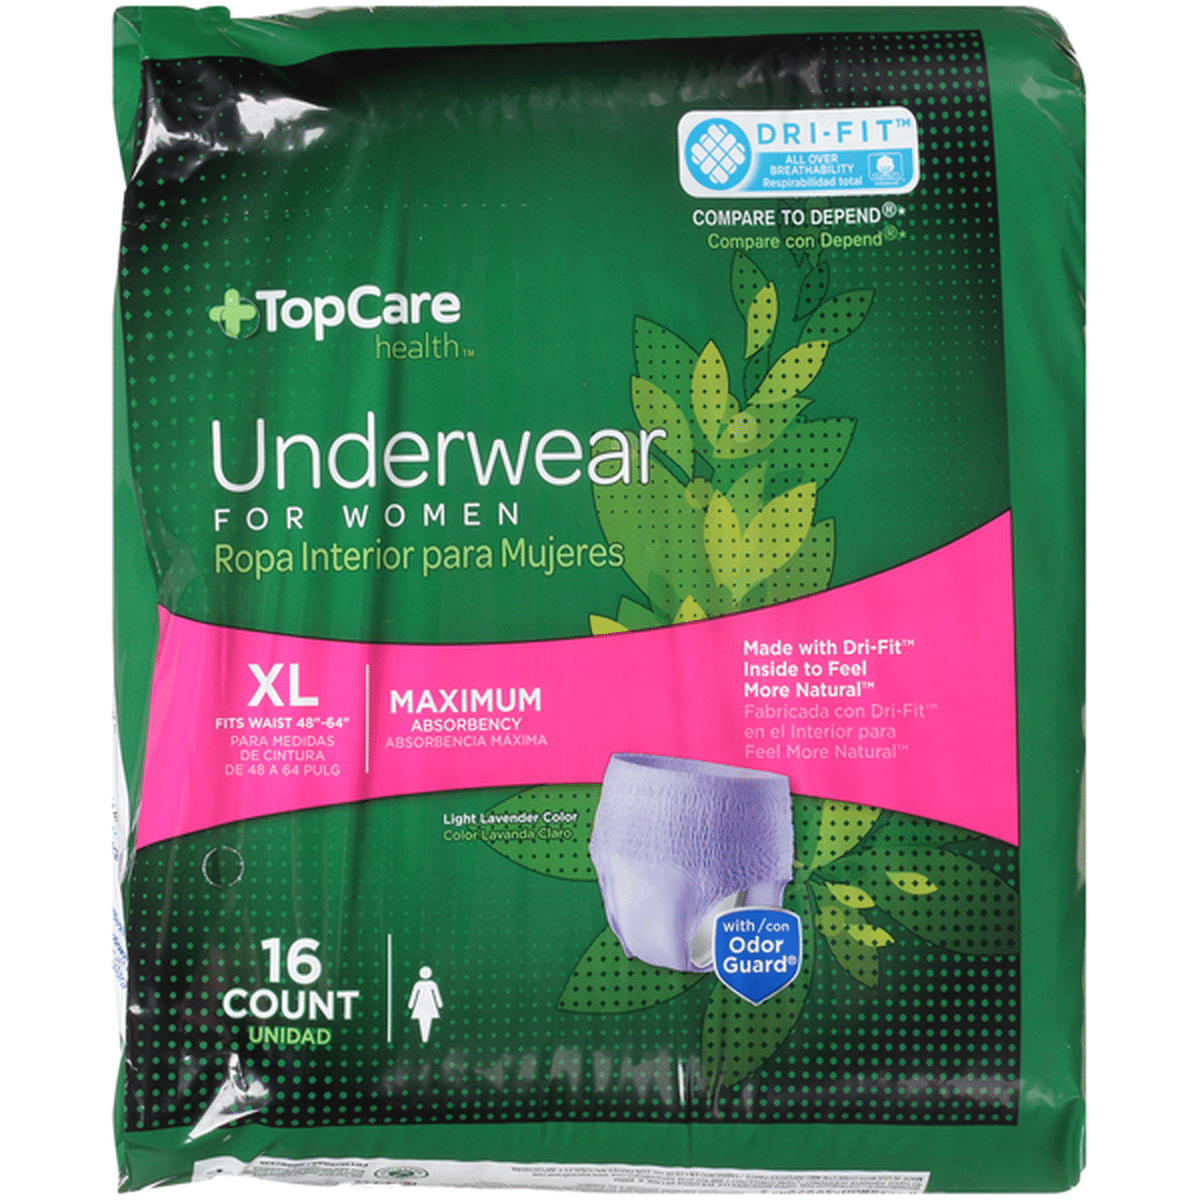 KosmoCare Protective Underwear, Pull Up Style, Pant Diaper for Large  Incontinence with maximum absorbences, Odor Guard, Cloth Feel Outer  Fabric, Breathable - Large